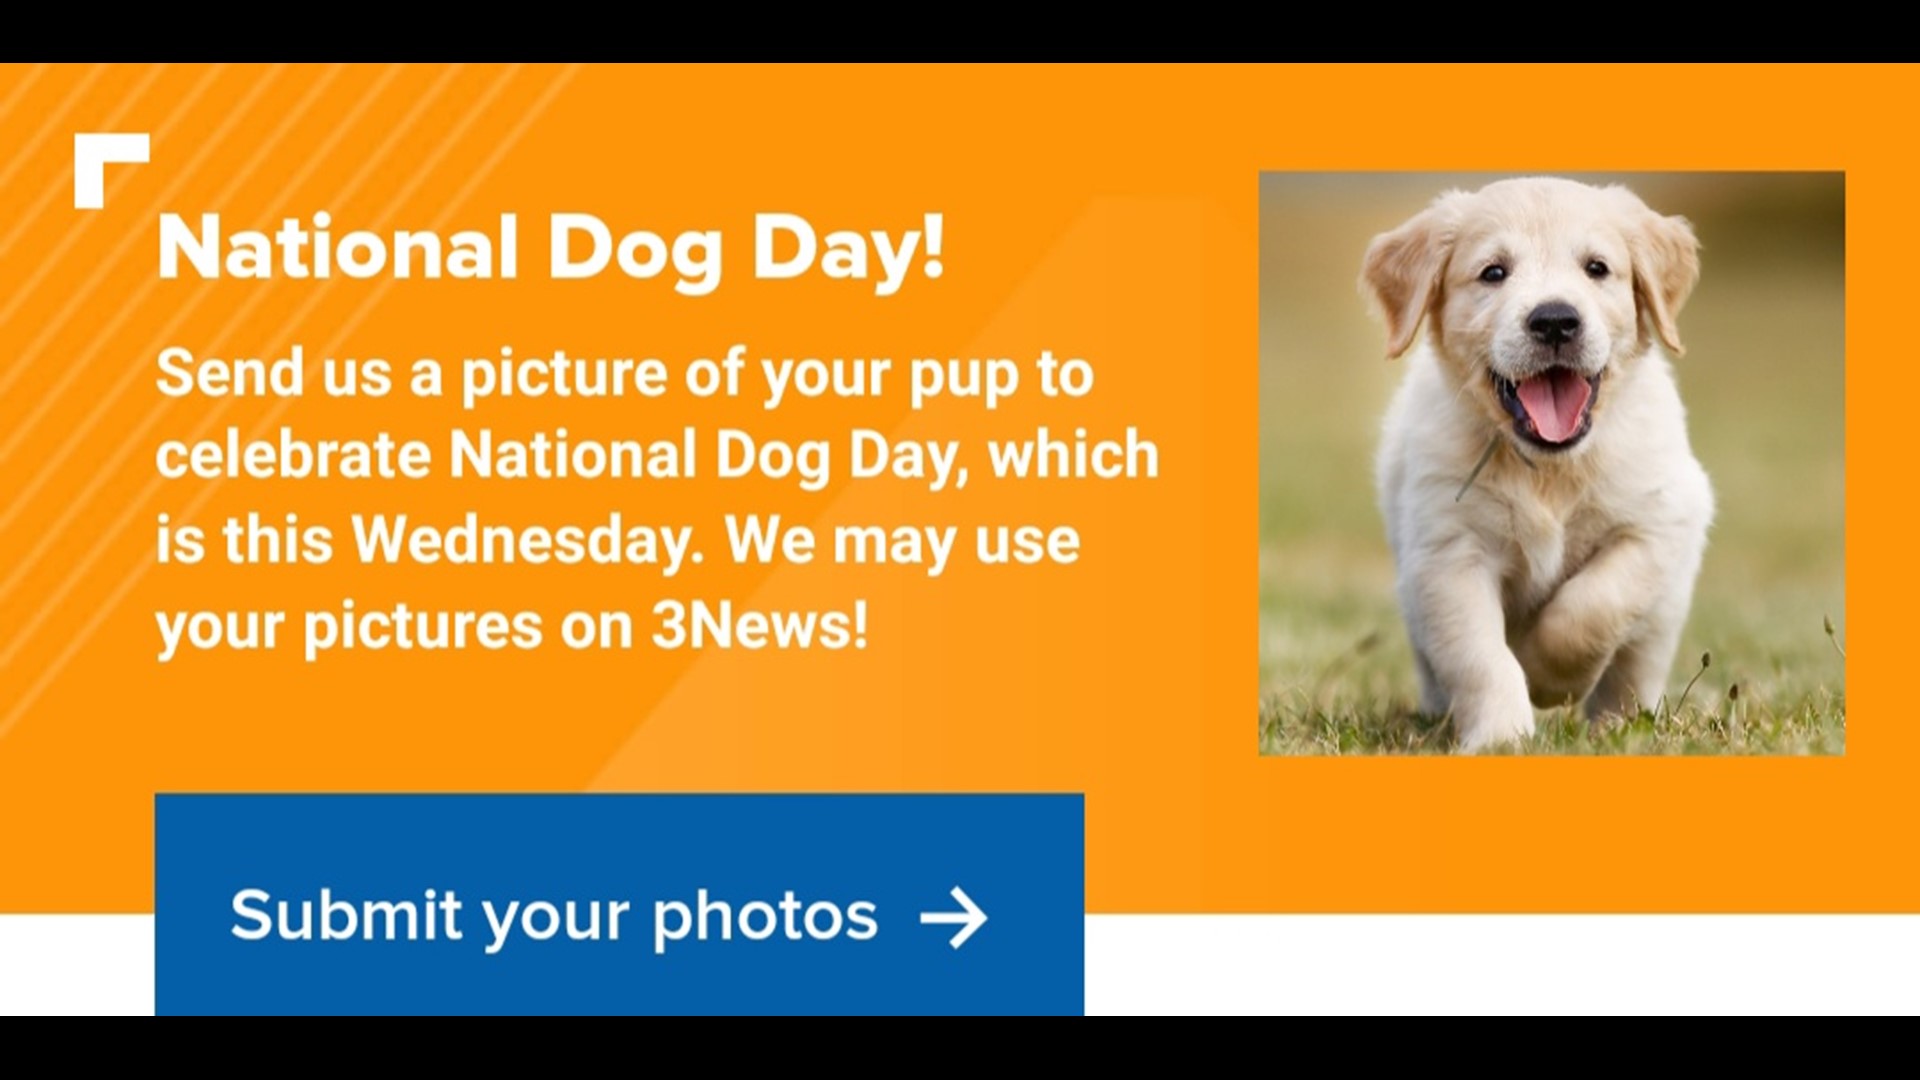 How to celebrate National Dog Day 2020